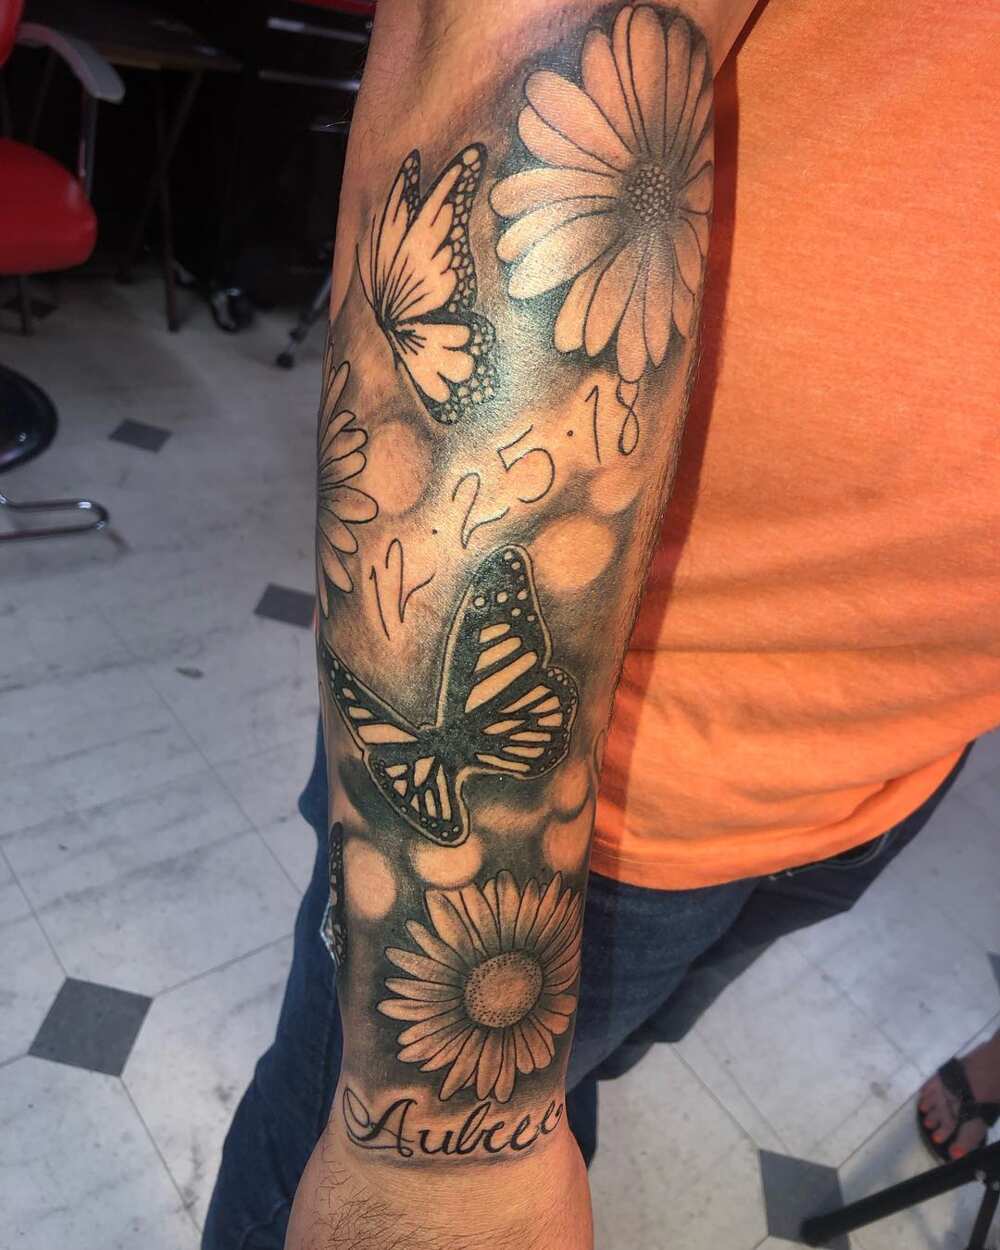 50 cool arm tattoos design ideas for men and women Legit.ng